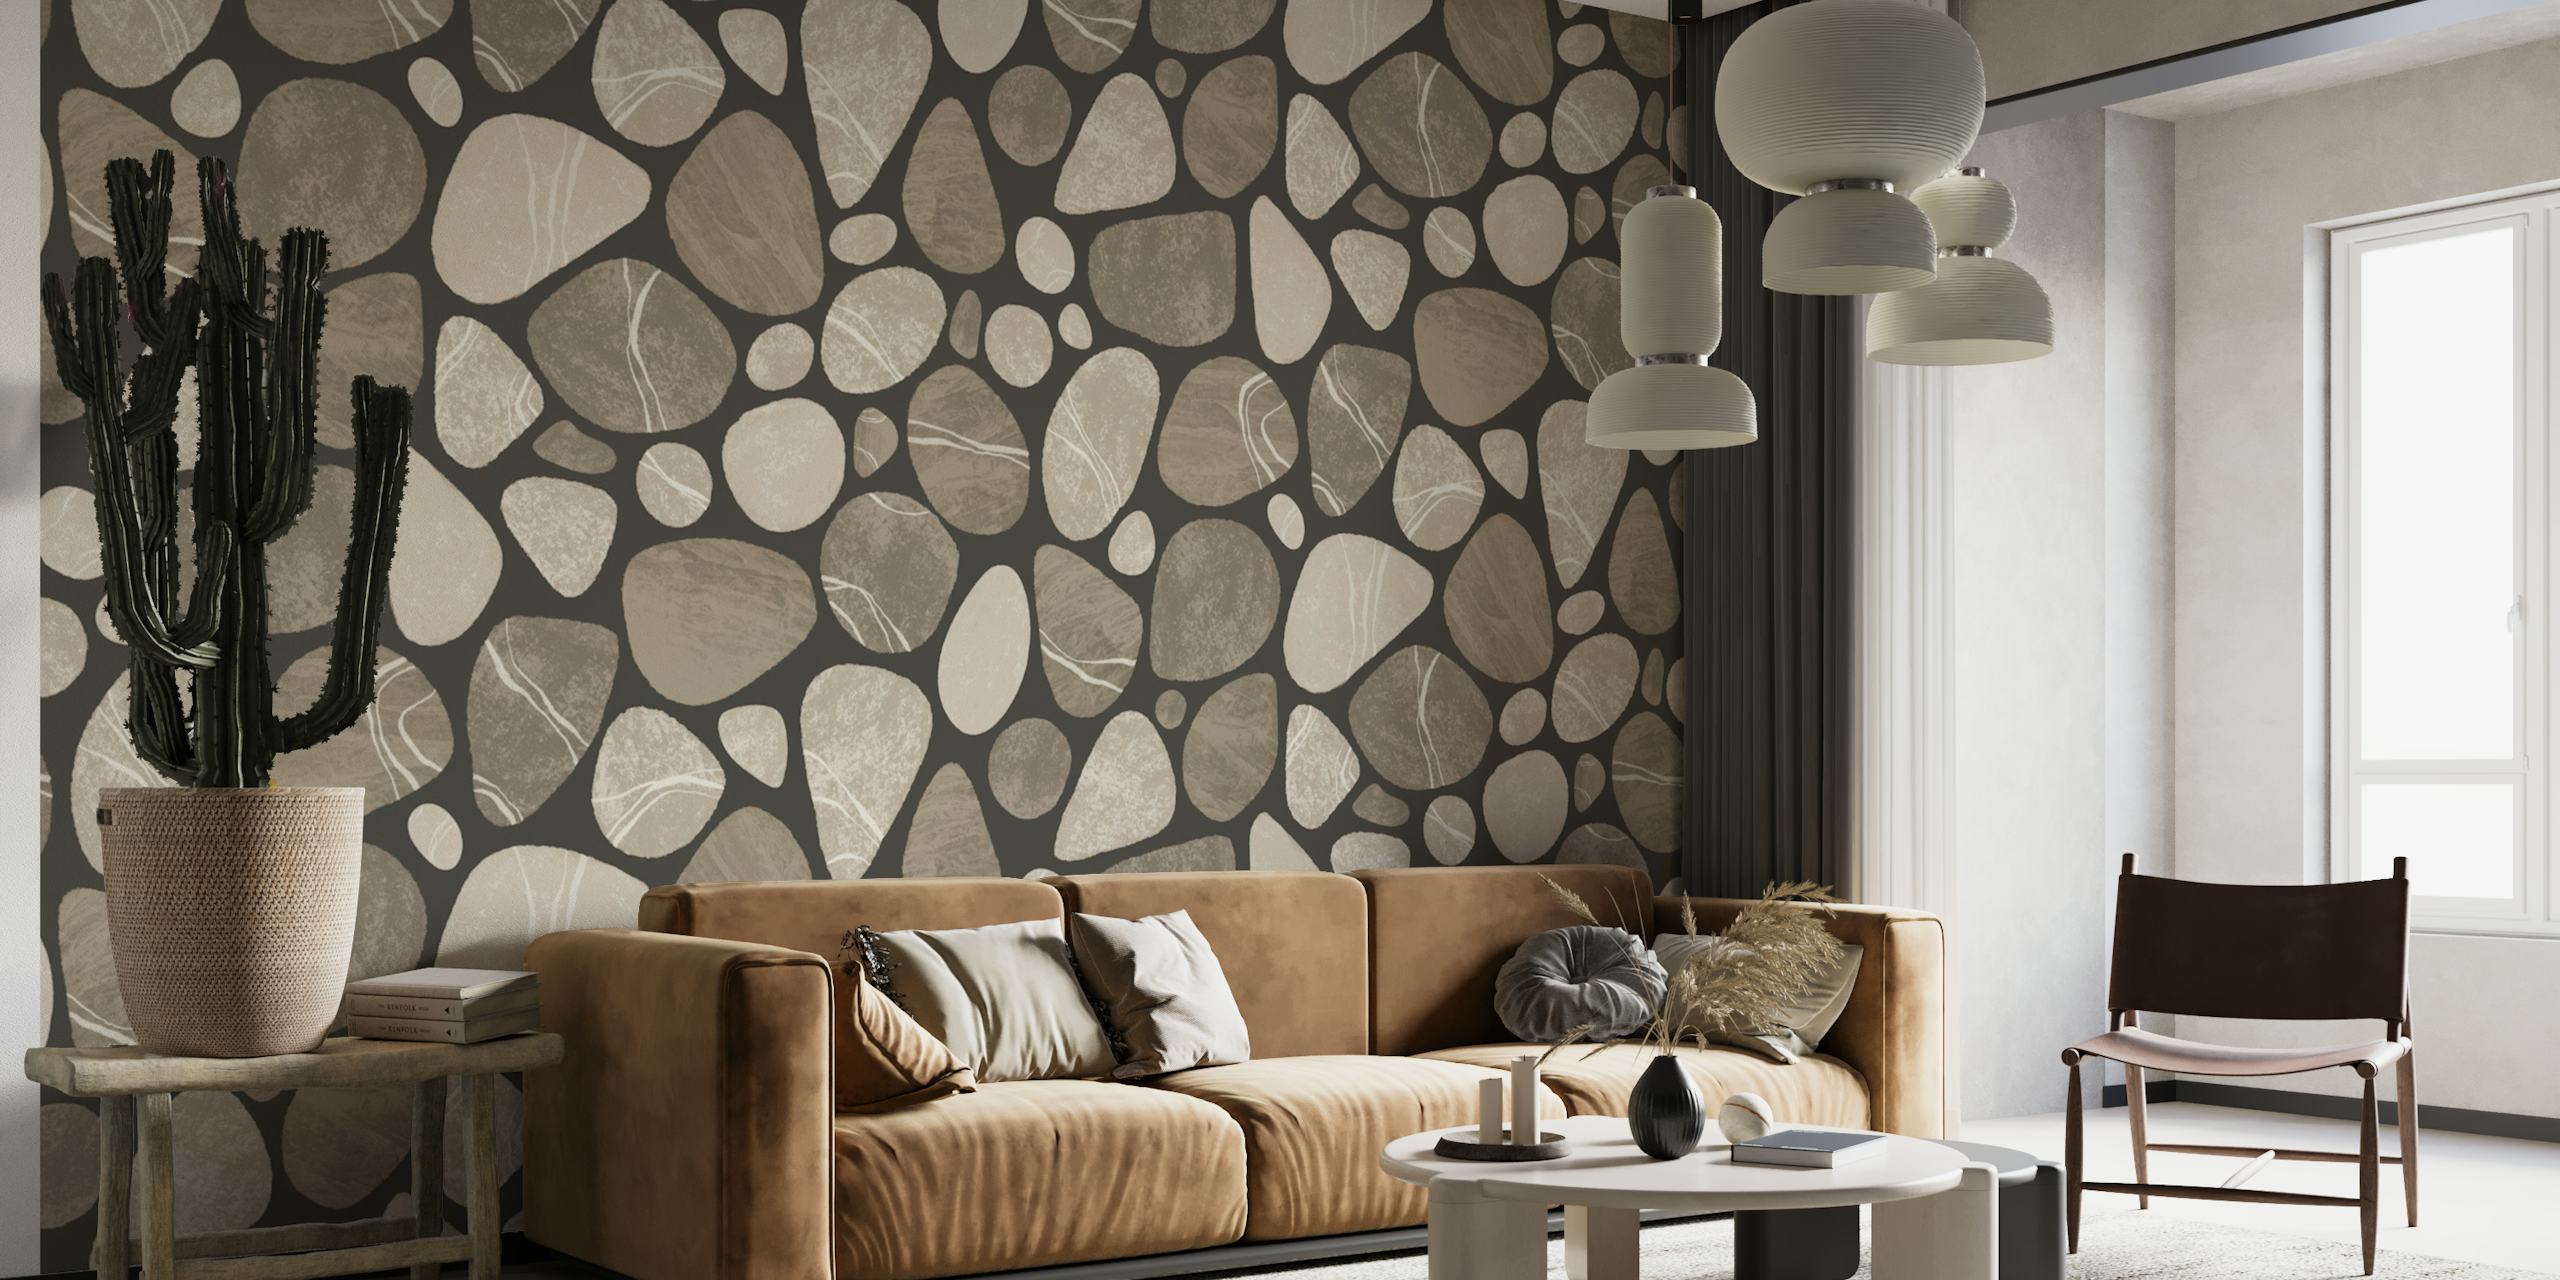 Pebble Serenity Stone Pattern Beauty Of Nature In Neutral Brown Beige Colors carta da parati